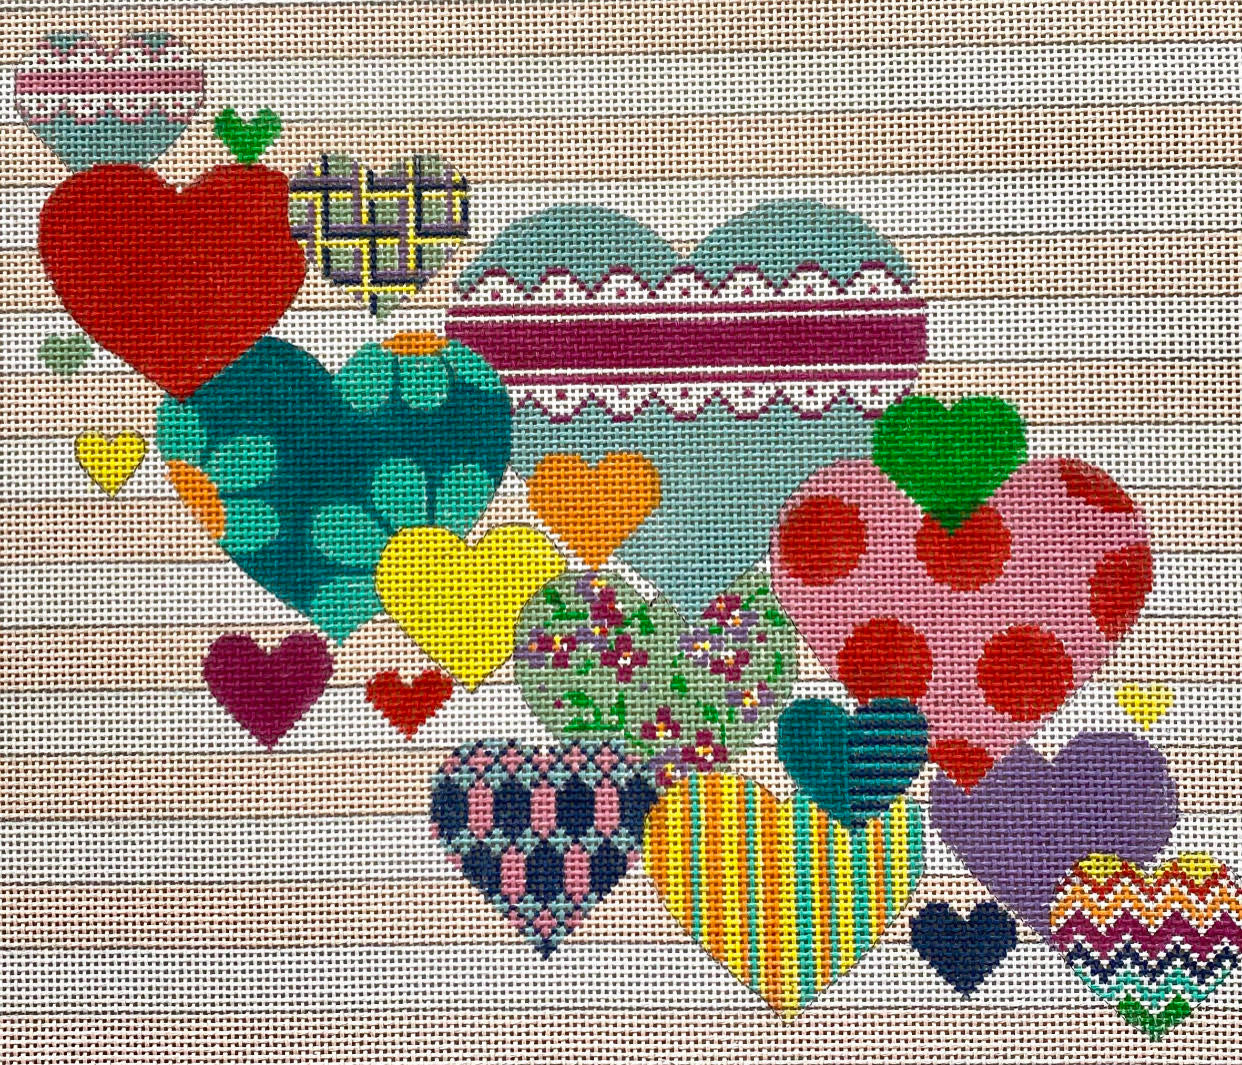 Alice Peterson 4315 Hearts Collage with Stripes